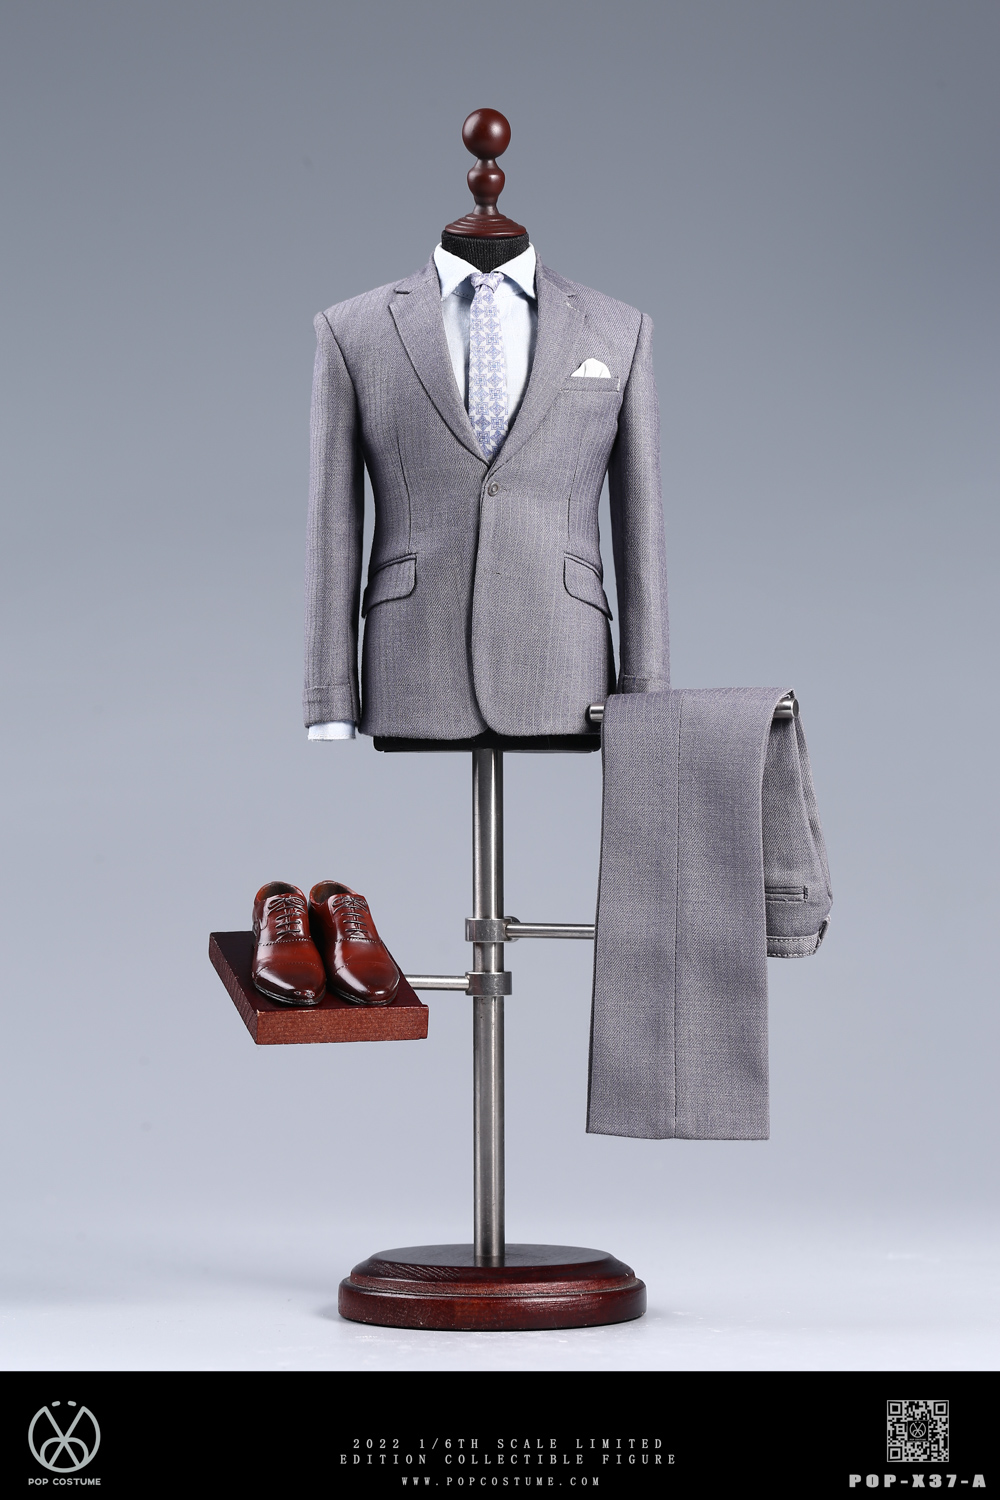 PopCostume - NEW PRODUCT: Pop Costume: 1/6 2022 Fall New Men's Haute Couture Suit Set Box [8 Styles Optional] & Display Stand 17242711